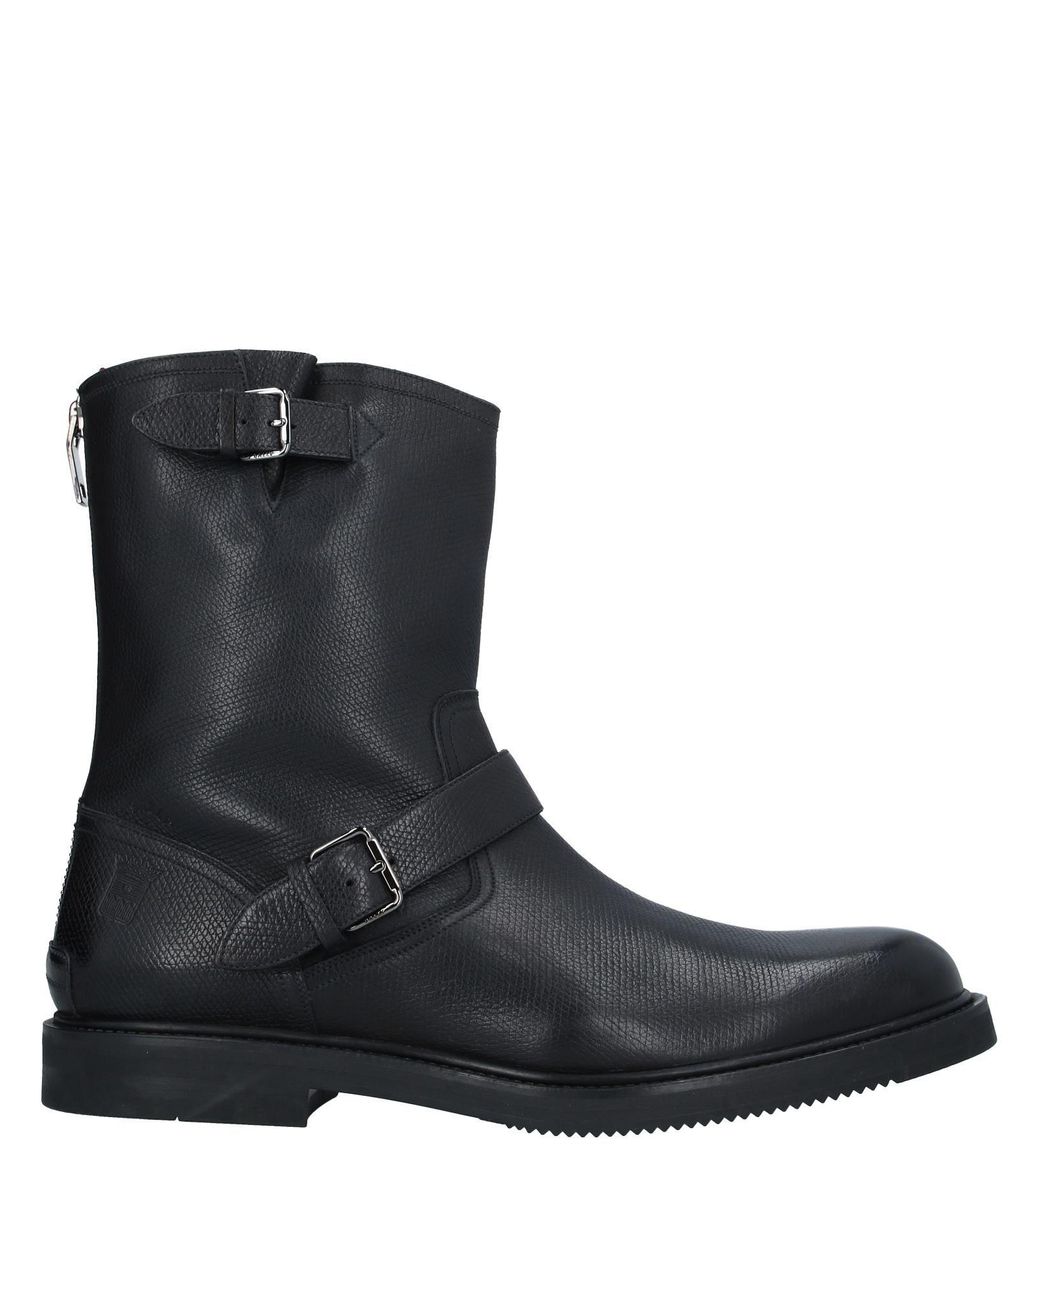 Bally Ankle Boots in Black for Men - Lyst